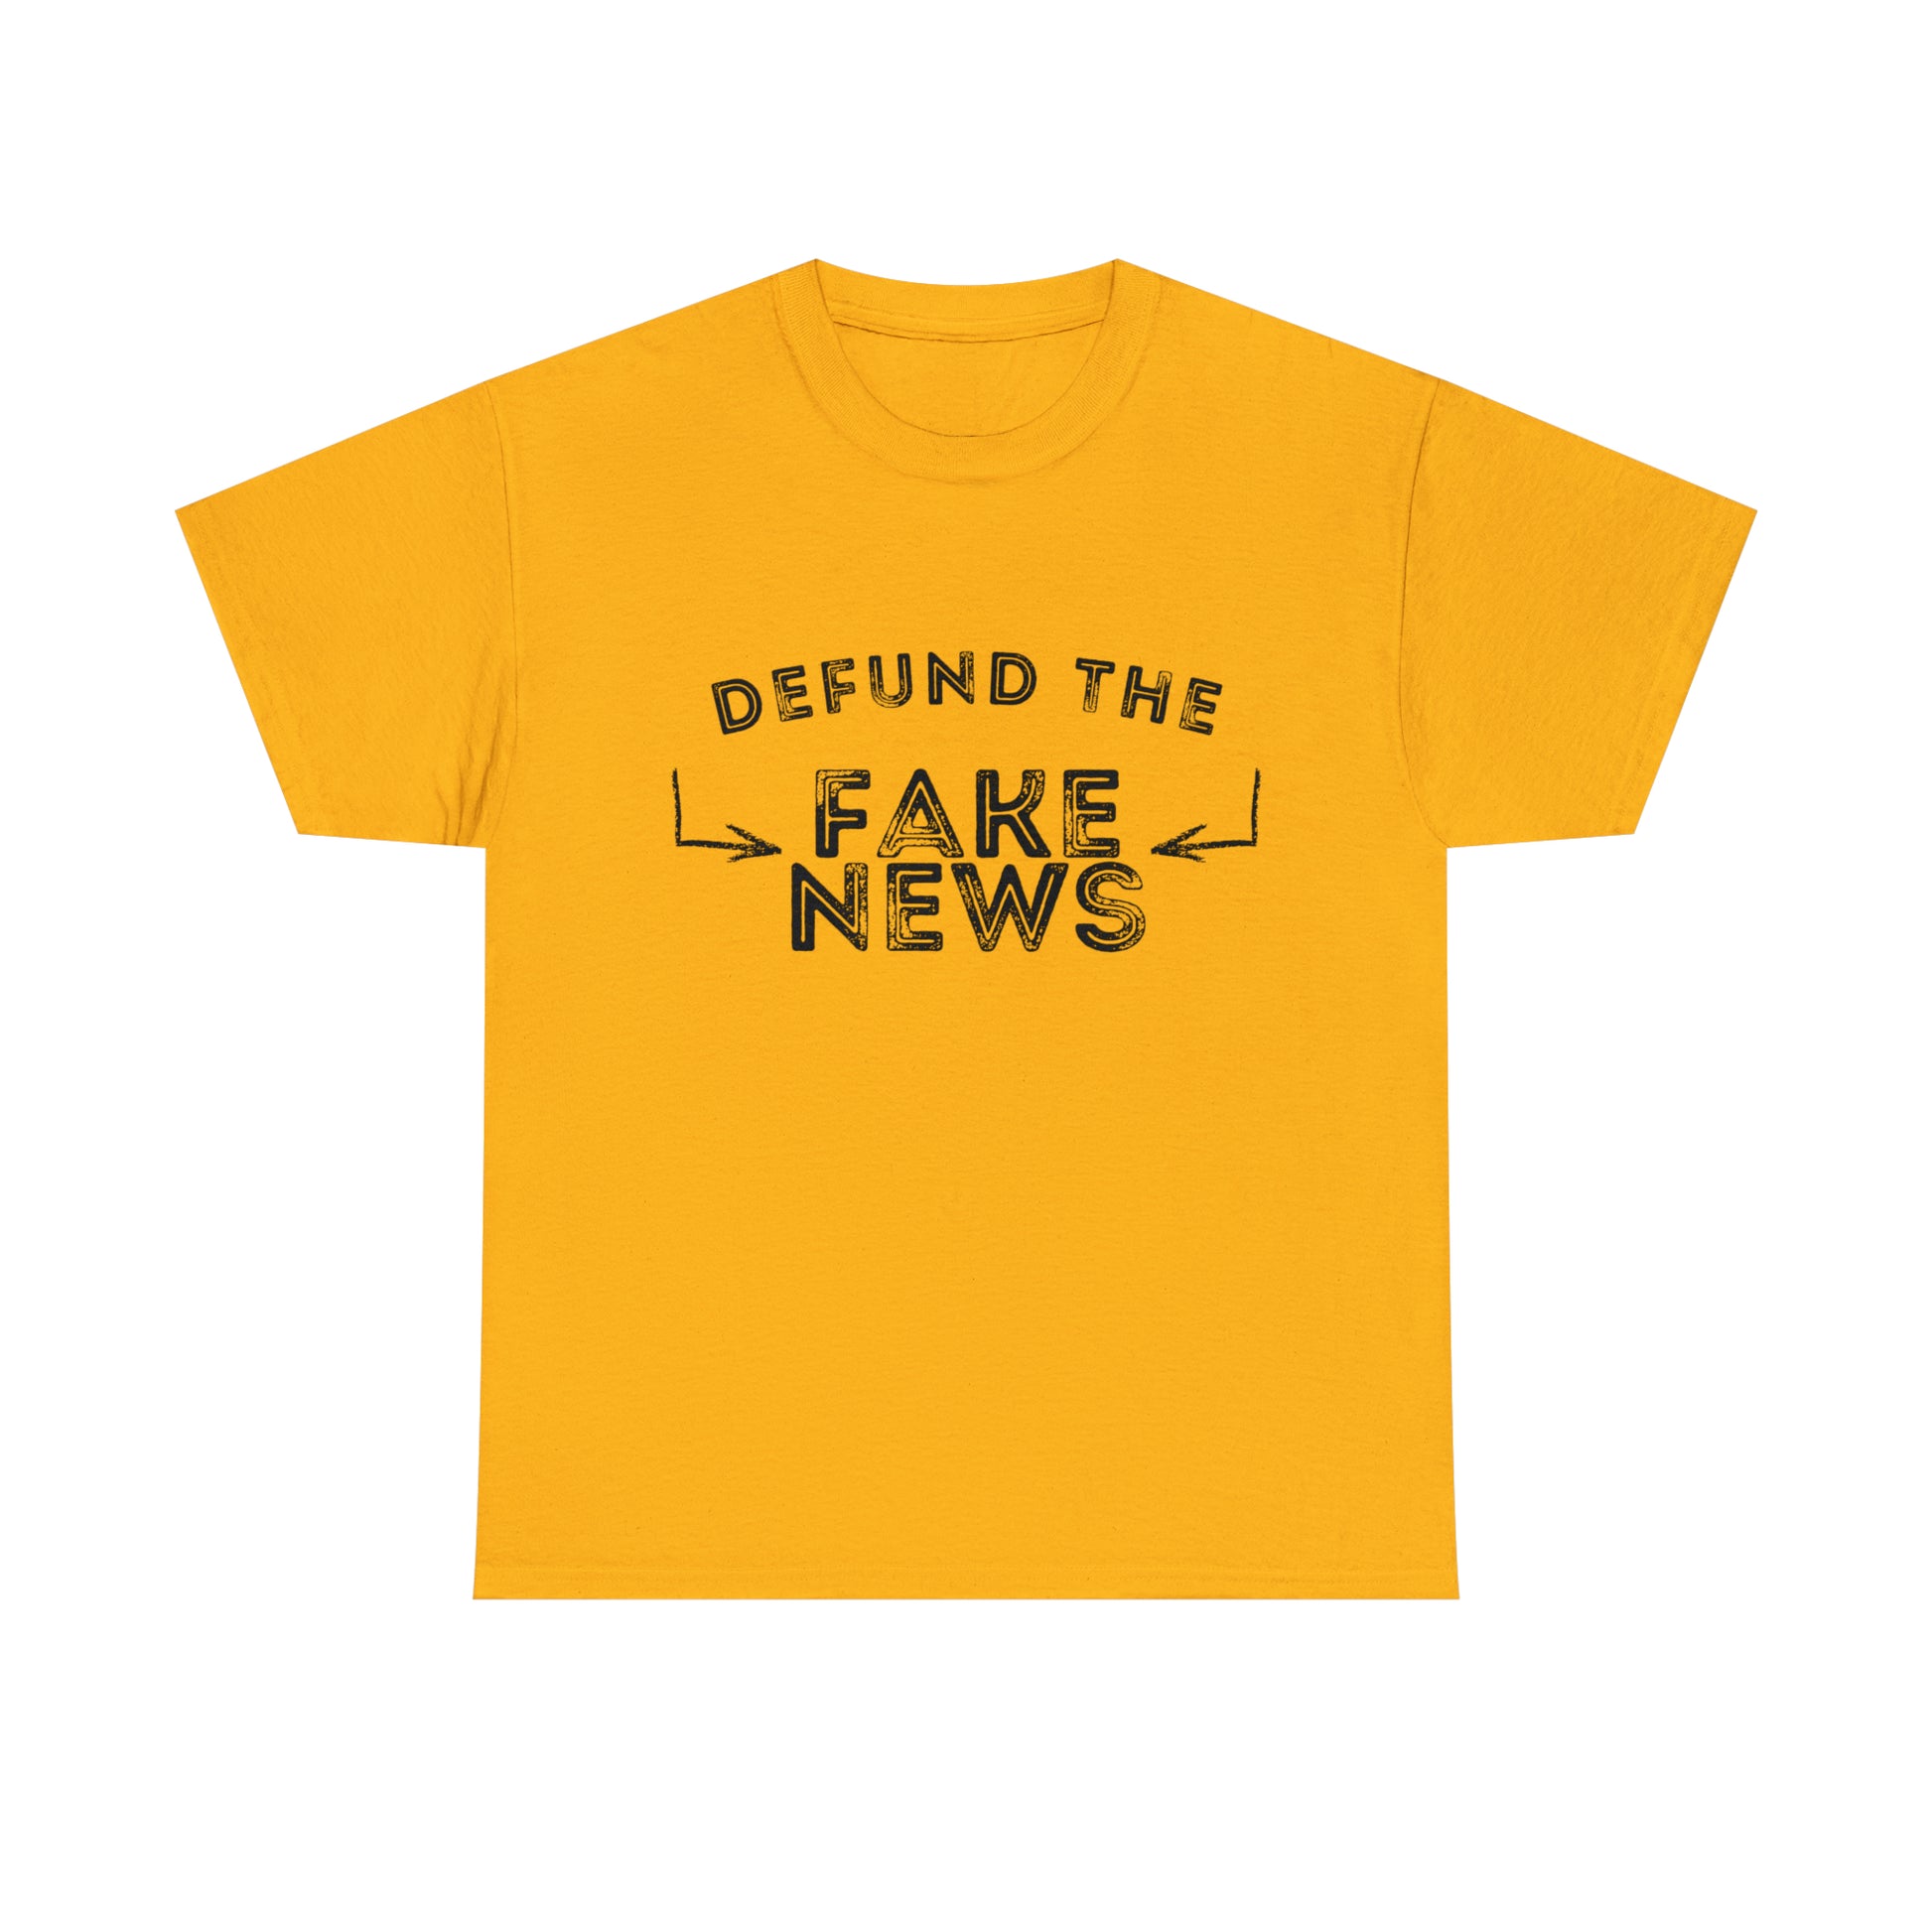 "Humorous shirt for media transparency advocates"